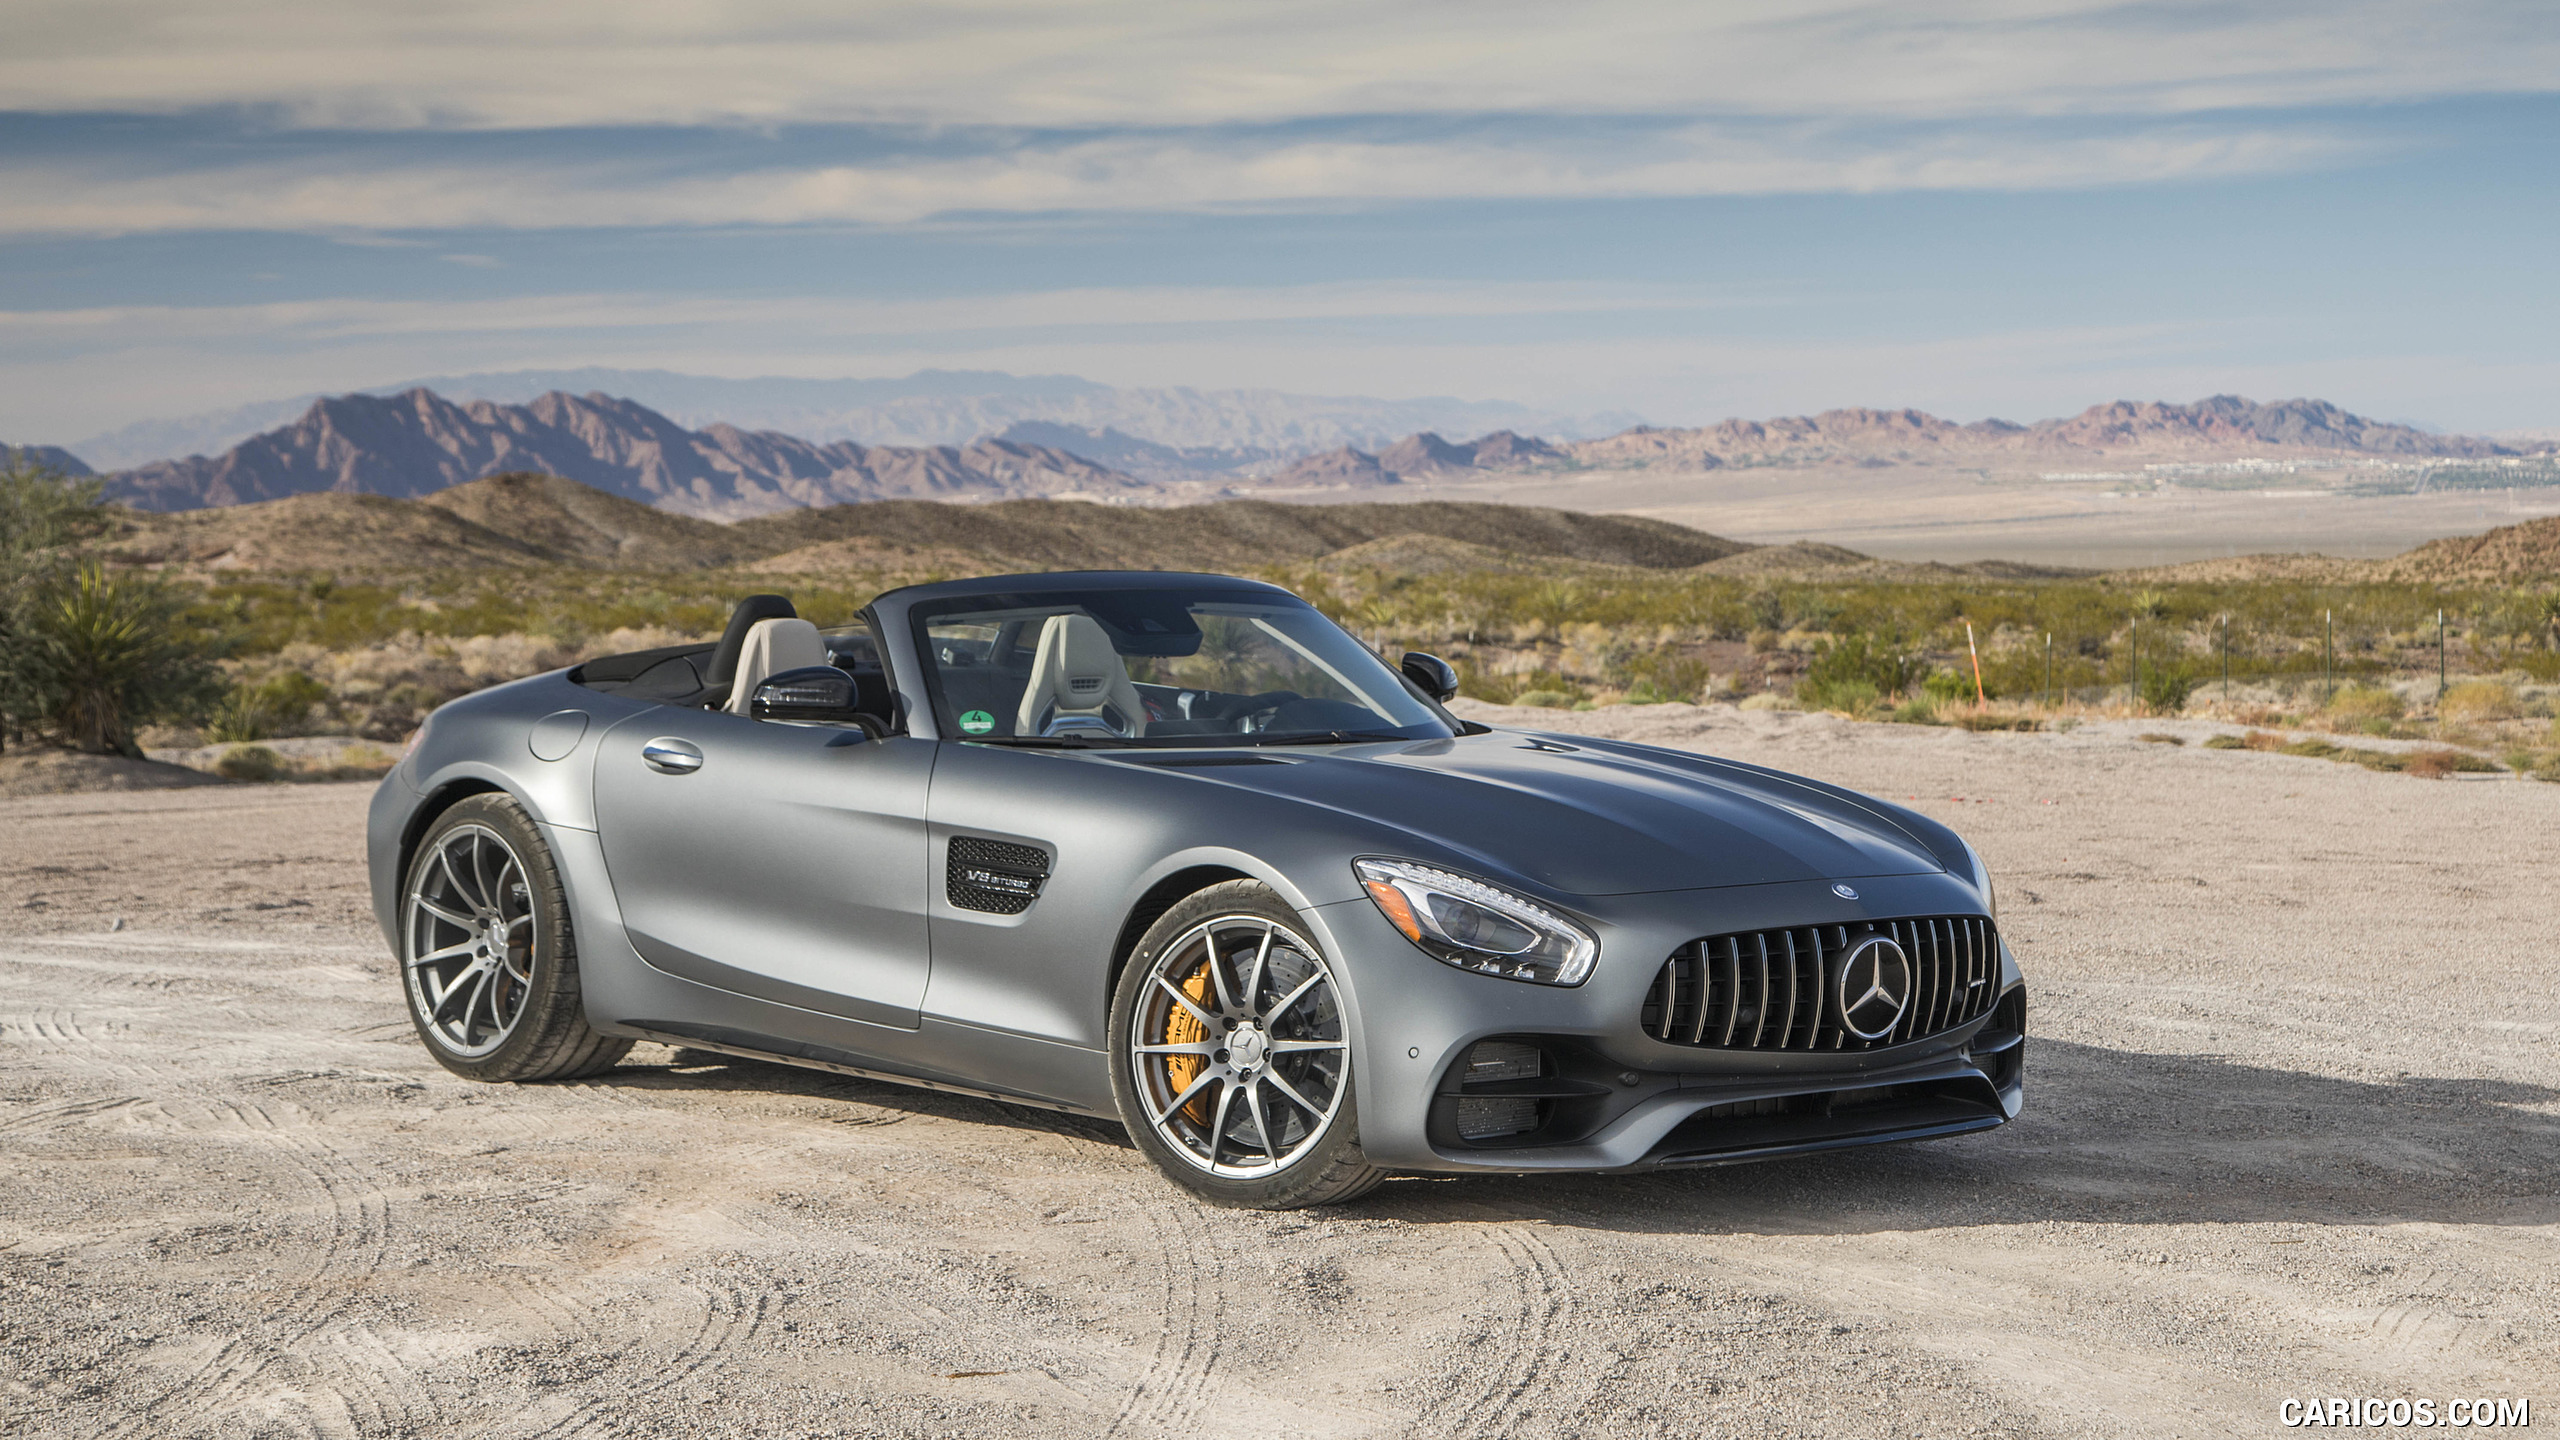 2018 Mercedes-AMG GT C Roadster - Front Three-Quarter, #39 of 350